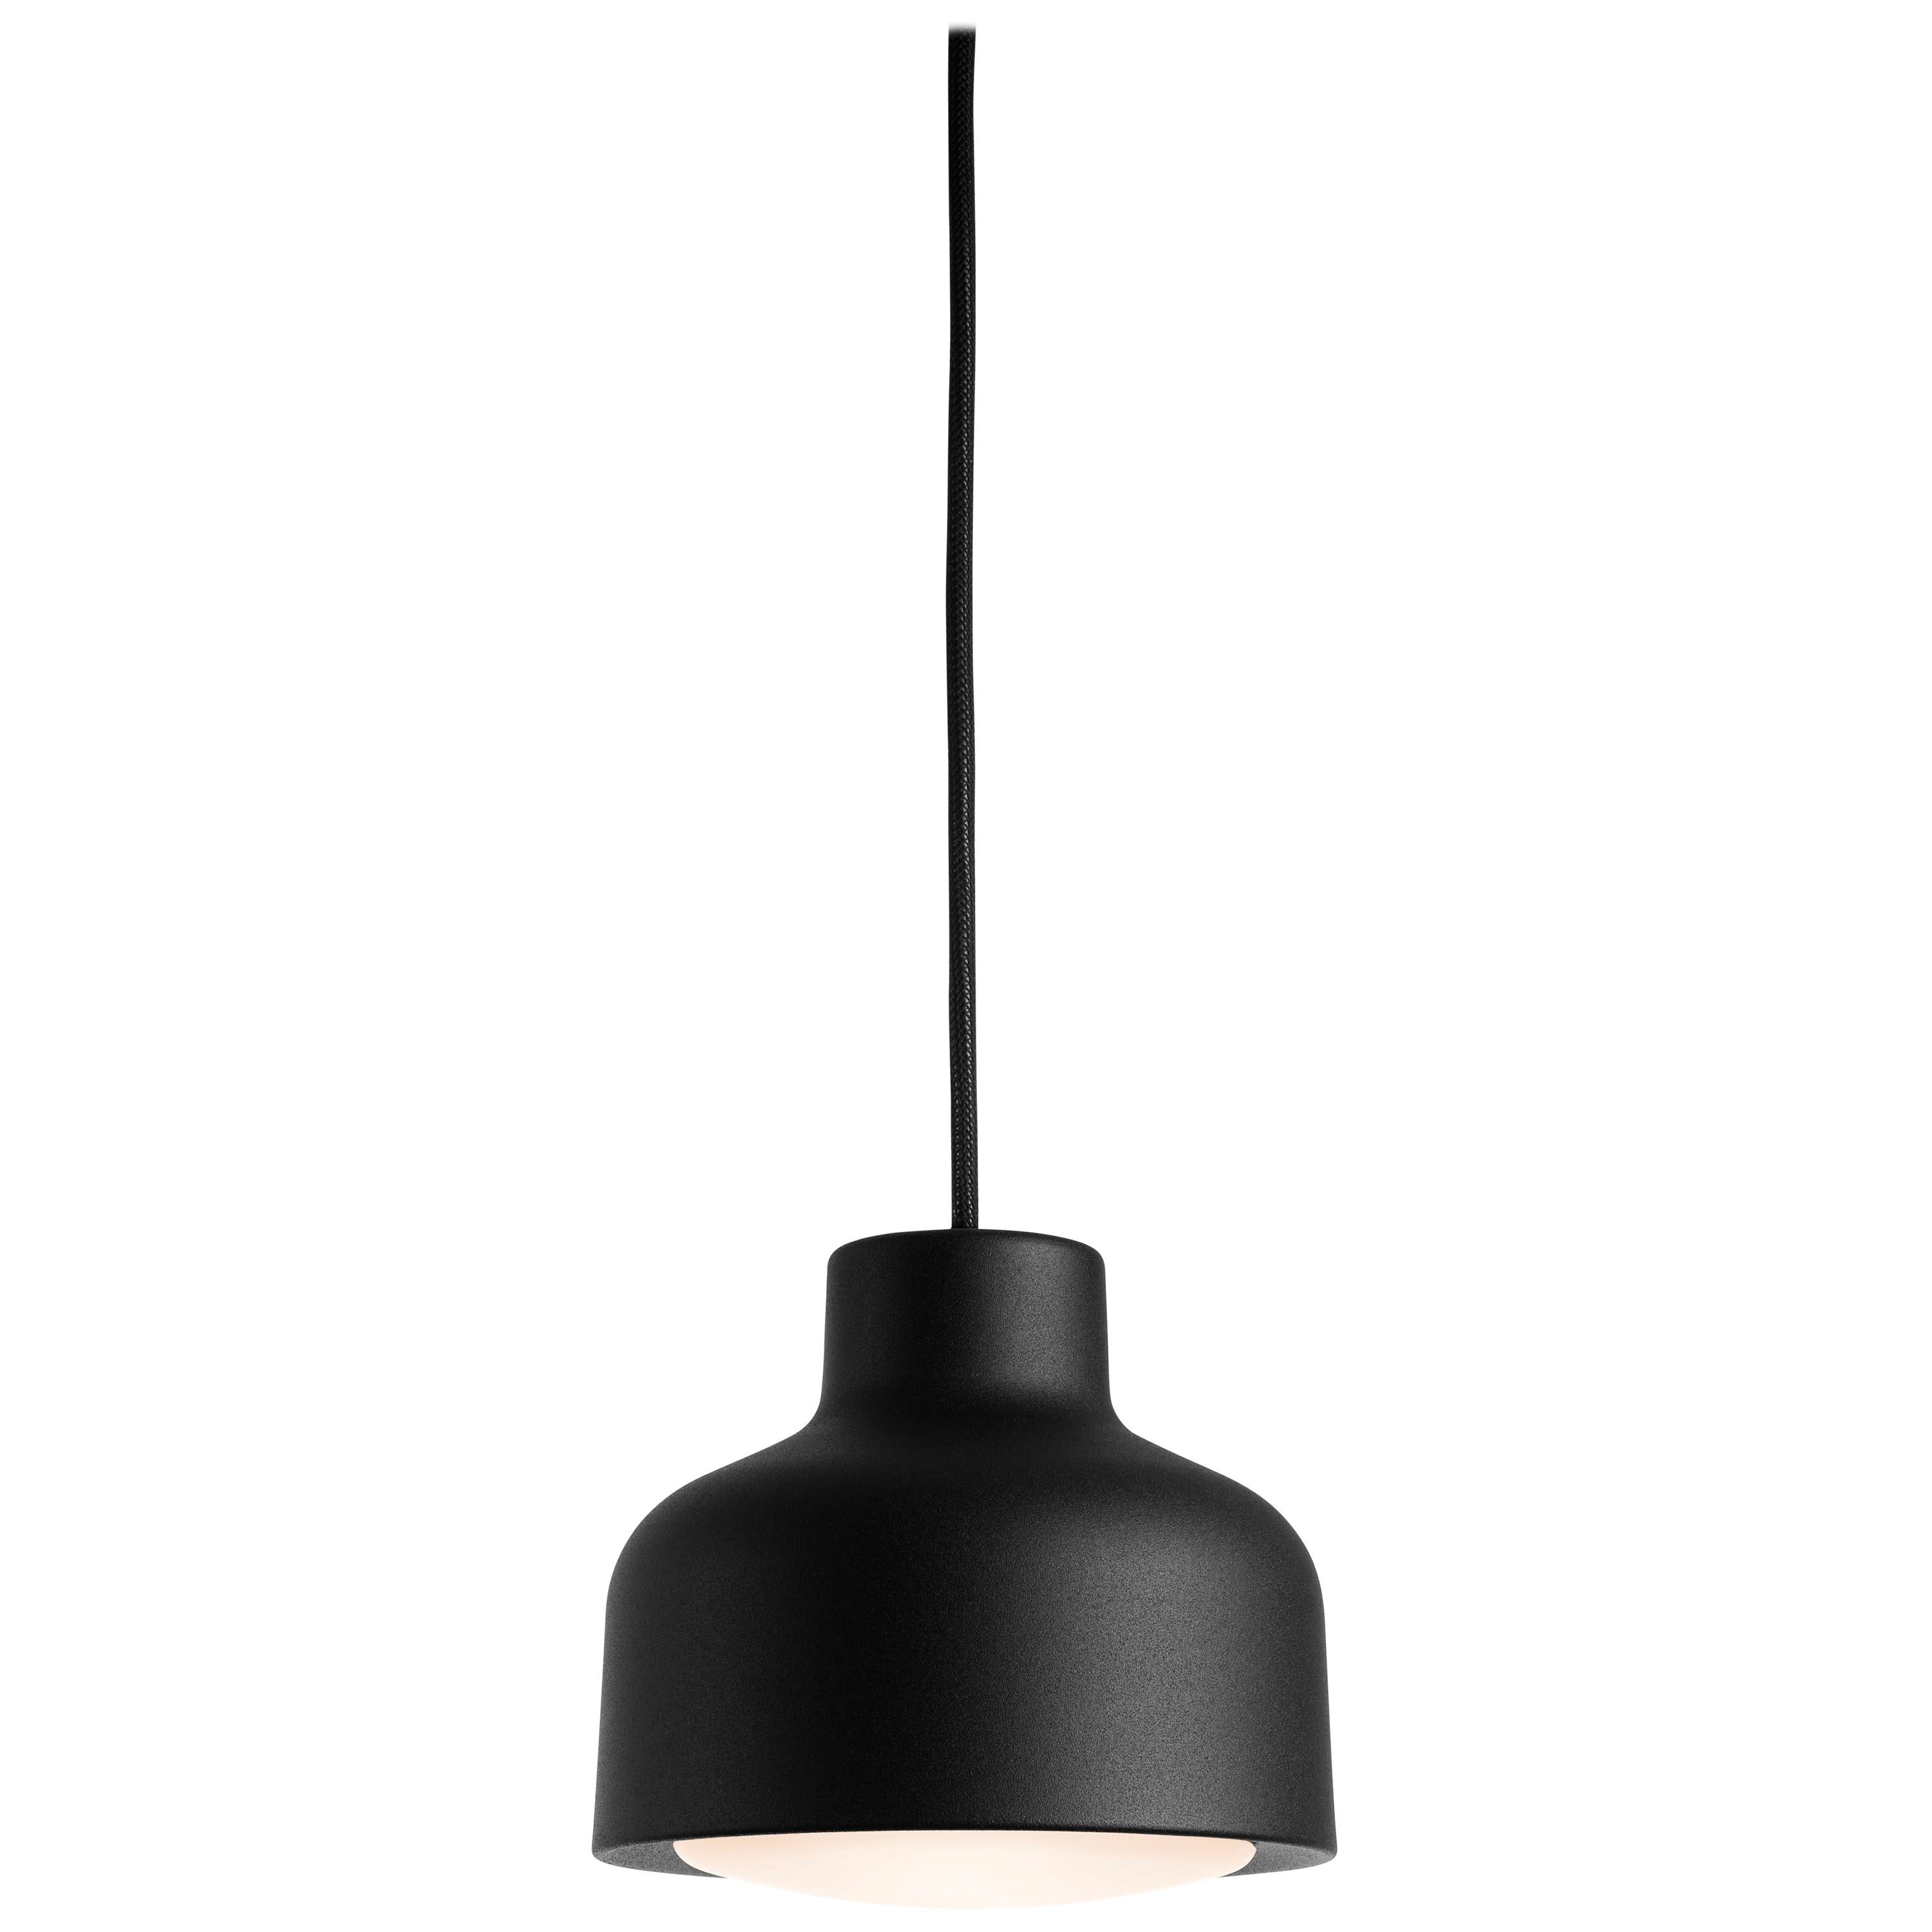 For Sale: Black Zero LED Lens Compact Pendant by Jens Fager